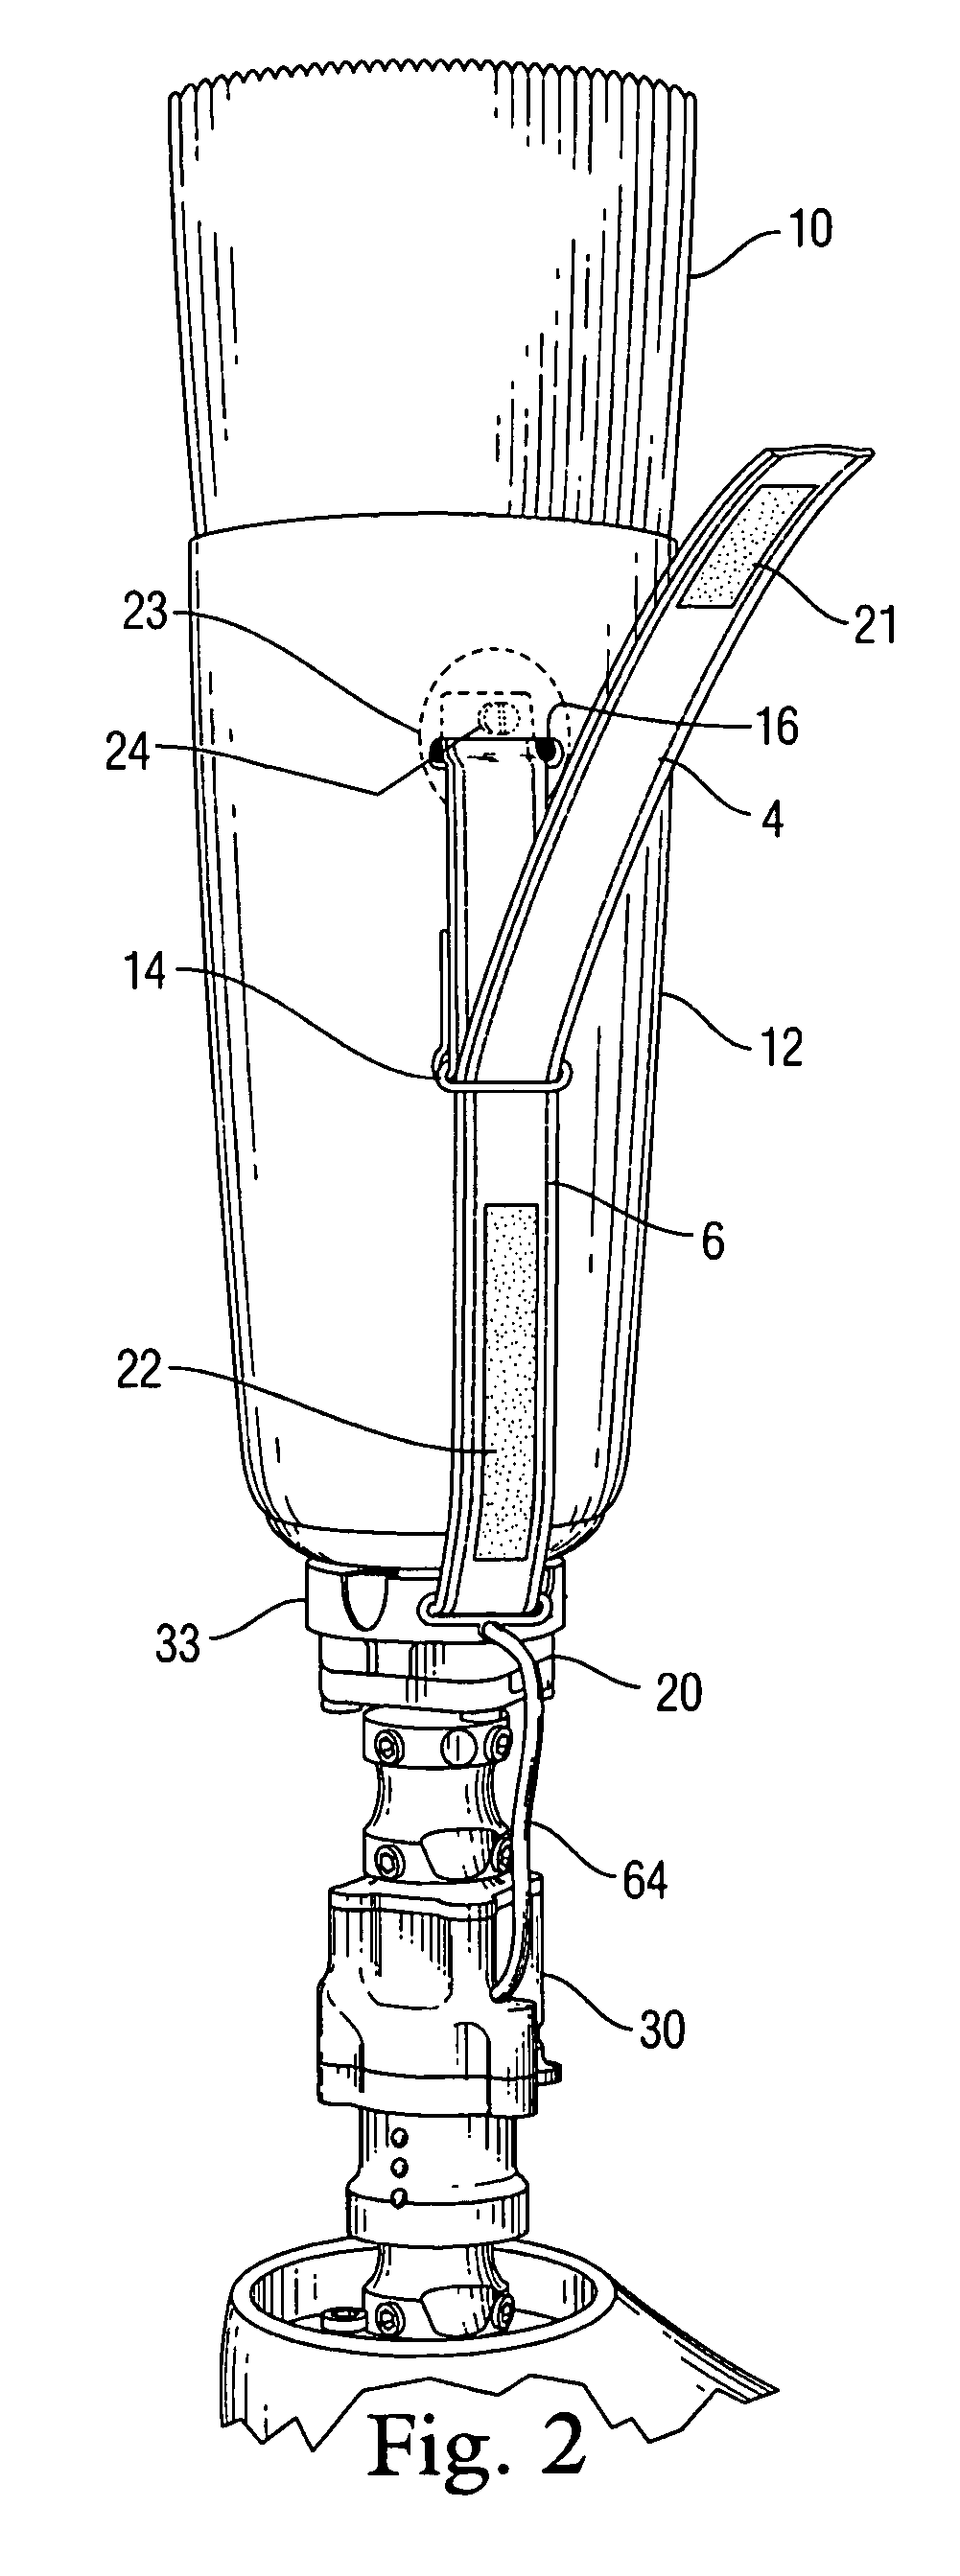 Anti-slip attachment and drainage system for prosthetics